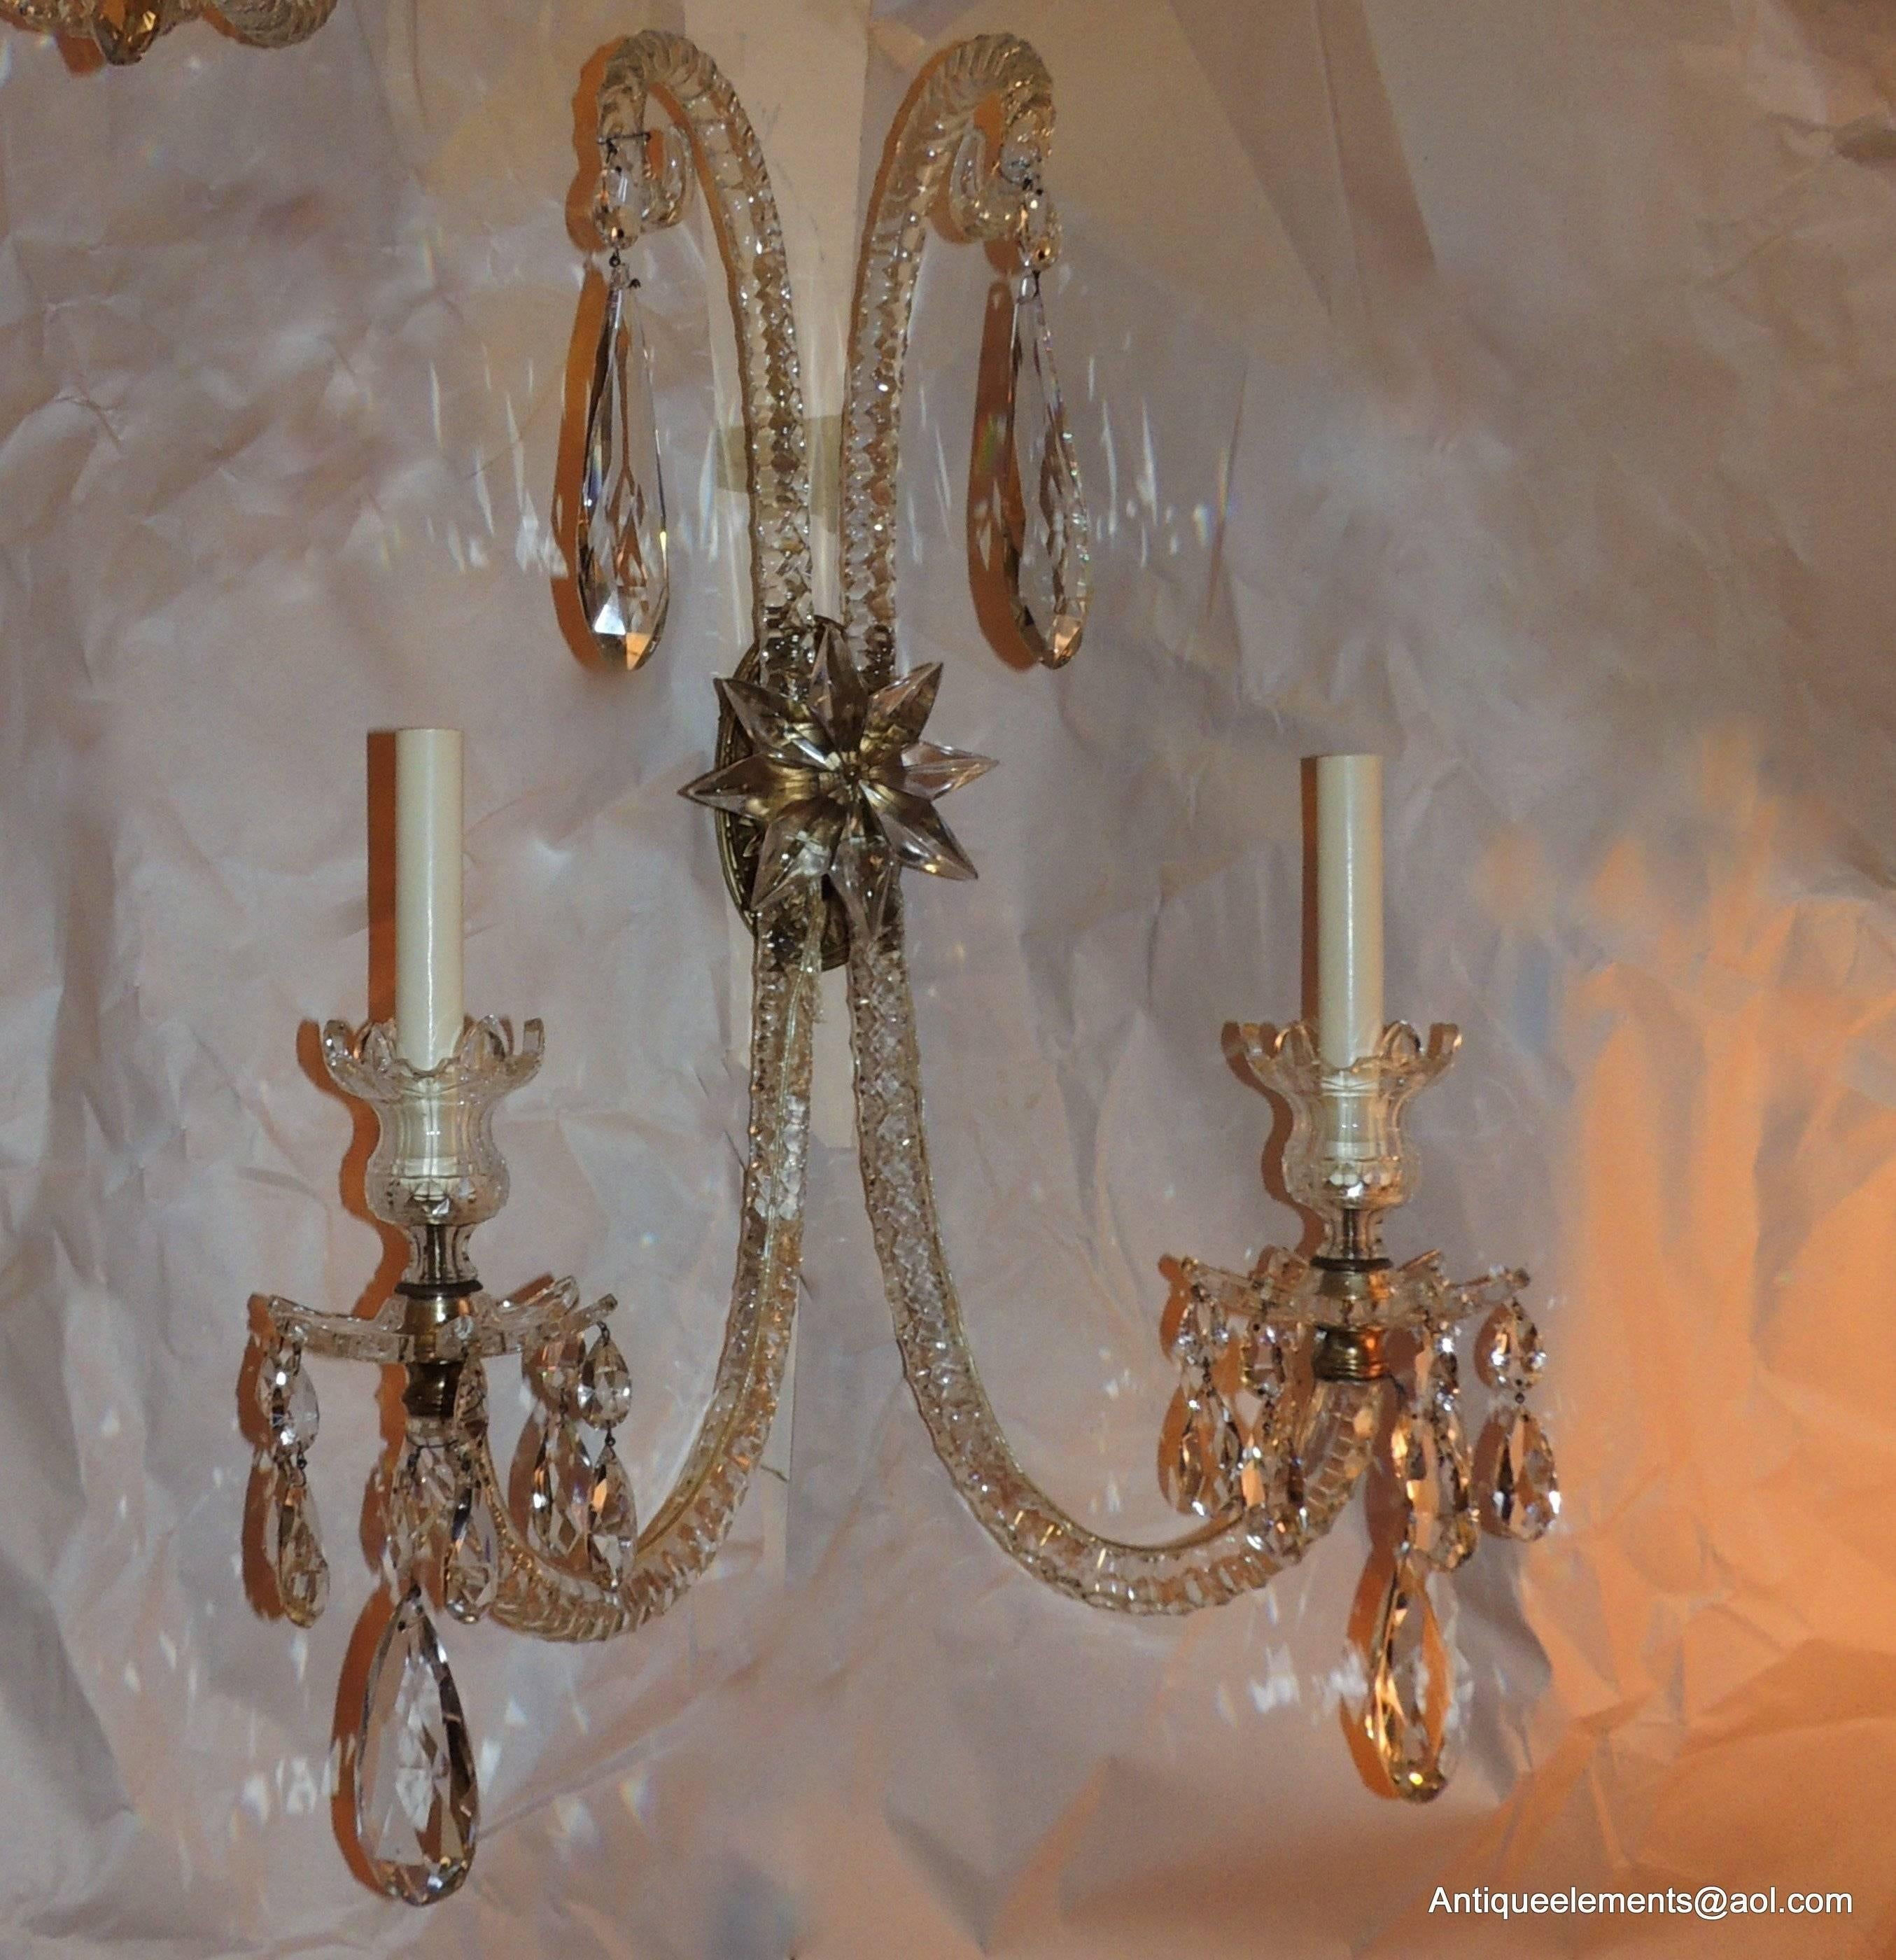 An elegant pair of sconces with beautiful cut crystal and faceted arms and prism drops and a doré bronze floral back center medallion and finished with a large cut crystal star. These large sconces are 26